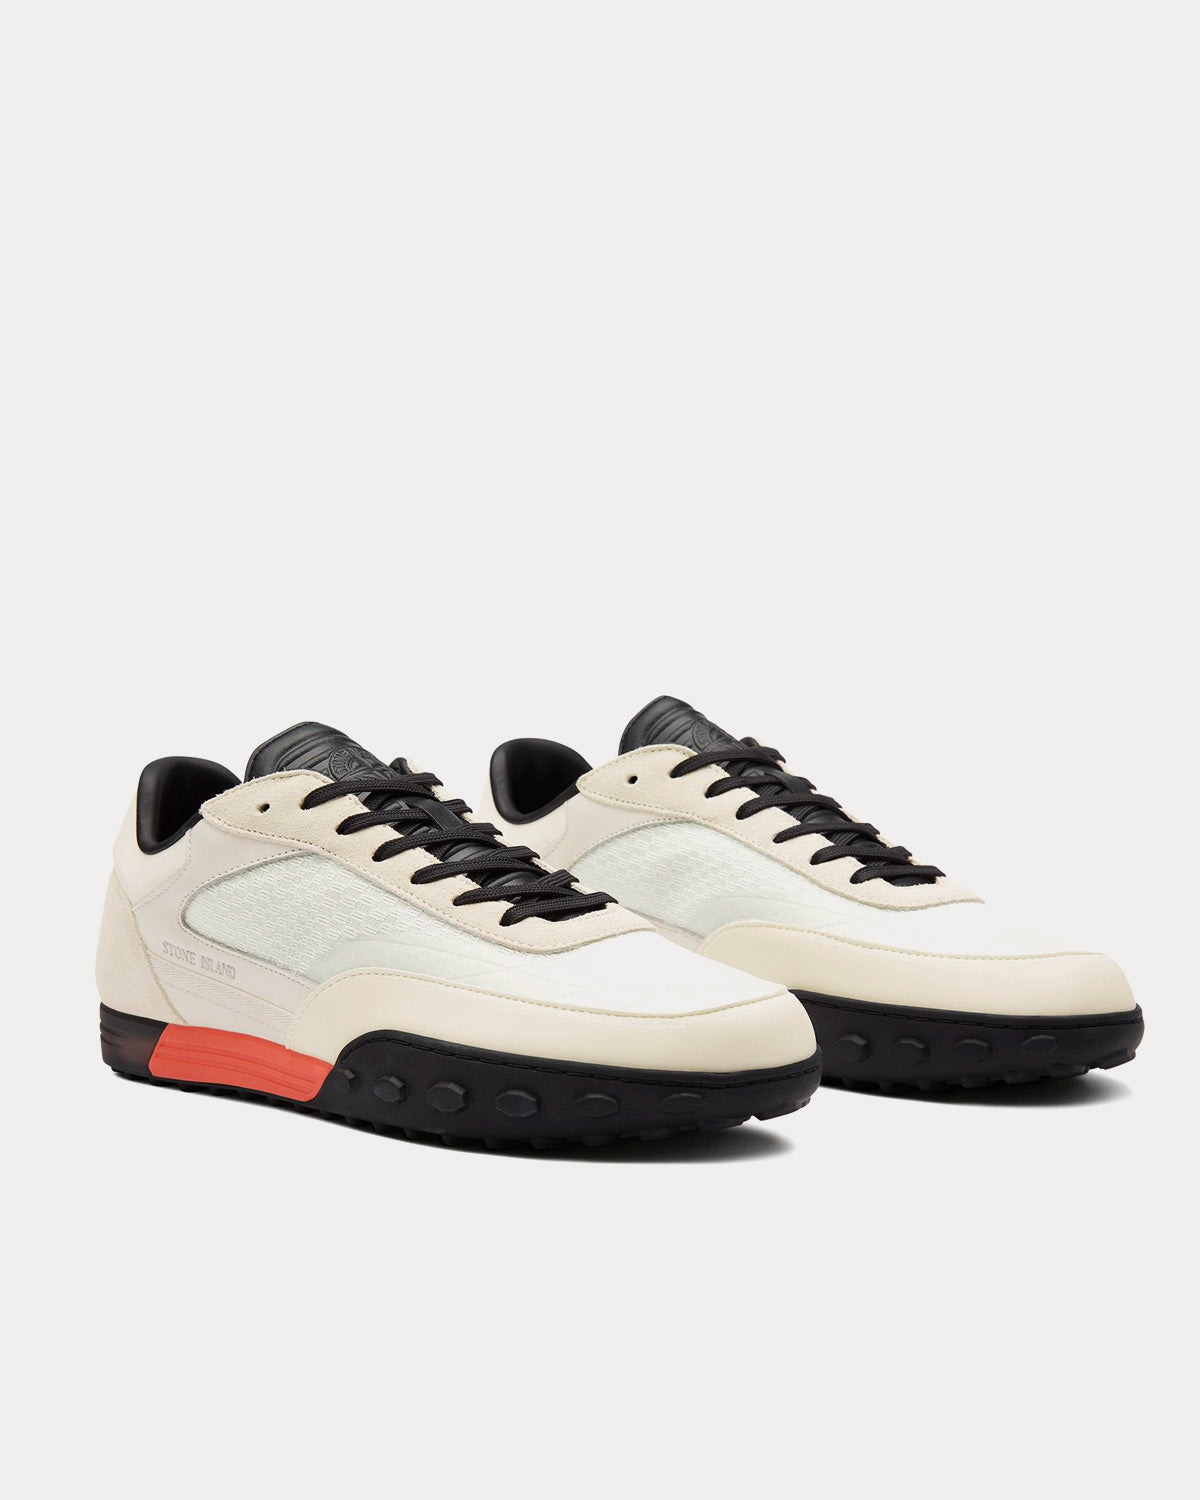 Stone Island - S0202 Ivory Low Top Sneakers